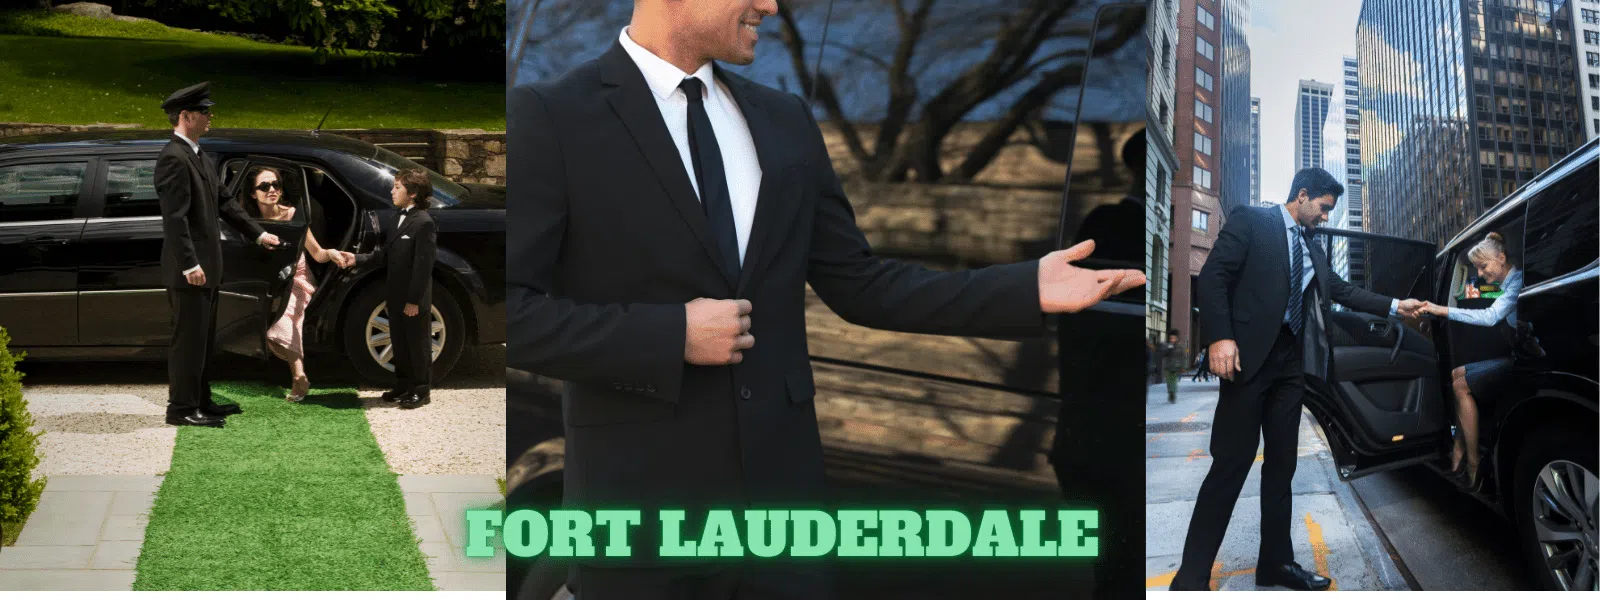 Fort Lauderdale Chauffeur Service ✅Chauffeur Service Fort Lauderdale ✅We offer professional Driver Service for chauffeur service, Fort Lauderdale chauffeur service Fort Lauderdale chauffeur service in Fort LauderdaleFort Lauderdale fl Driver in Fort Lauderdale fl Driver Service Fort Lauderdale fl private chauffeurservice Fort Lauderdale Fort Lauderdale beach chauffeur service in Fort Lauderdale beach Fort Lauderdale Fort Lauderdalechauffeurservice to Fort LauderdaleFort Lauderdale private chauffeurserviceFort Lauderdale chauffeur serviceschauffrservices in Fort Lauderdalebest chauffeur service in Fort Lauderdale best chauffeurservice Fort Lauderdalecheap chauffeur service Fort Lauderdale luxury chauffeur service Fort Lauderdaleblack chauffeur service Fort LauderdaleFort Lauderdale luxury ChauffeurServiceFort Lauderdale black chauffeur service chauffeur service Fort LauderdaleFort Lauderdale limos & town Fort LauderdaleFort Lauderdale luxury transportation Fort Lauderdale executive chauffeur service chauffeurservice in Florida Fort LauderdaleFort Lauderdale town chauffeurserviceFort Lauderdale chauffeur services airport Fort Lauderdale chauffeur services luxury transportation Fort Lauderdalechauffeurservice Fort Lauderdale to Orlando fort Lauderdale beach limosFort Lauderdale beach limousine service best Fort Lauderdale limo service transportation services Fort Lauderdale, Florida high-end service Fort Lauderdale private driver service Fort Lauderdalechauffeurservice Ft Lauderdaleprice for a chauffeur service Ft LauderdaleFort Lauderdale chauffeur service online fare Fort Lauderdale chauffeurserviceFort Lauderdale chauffeur service booking online